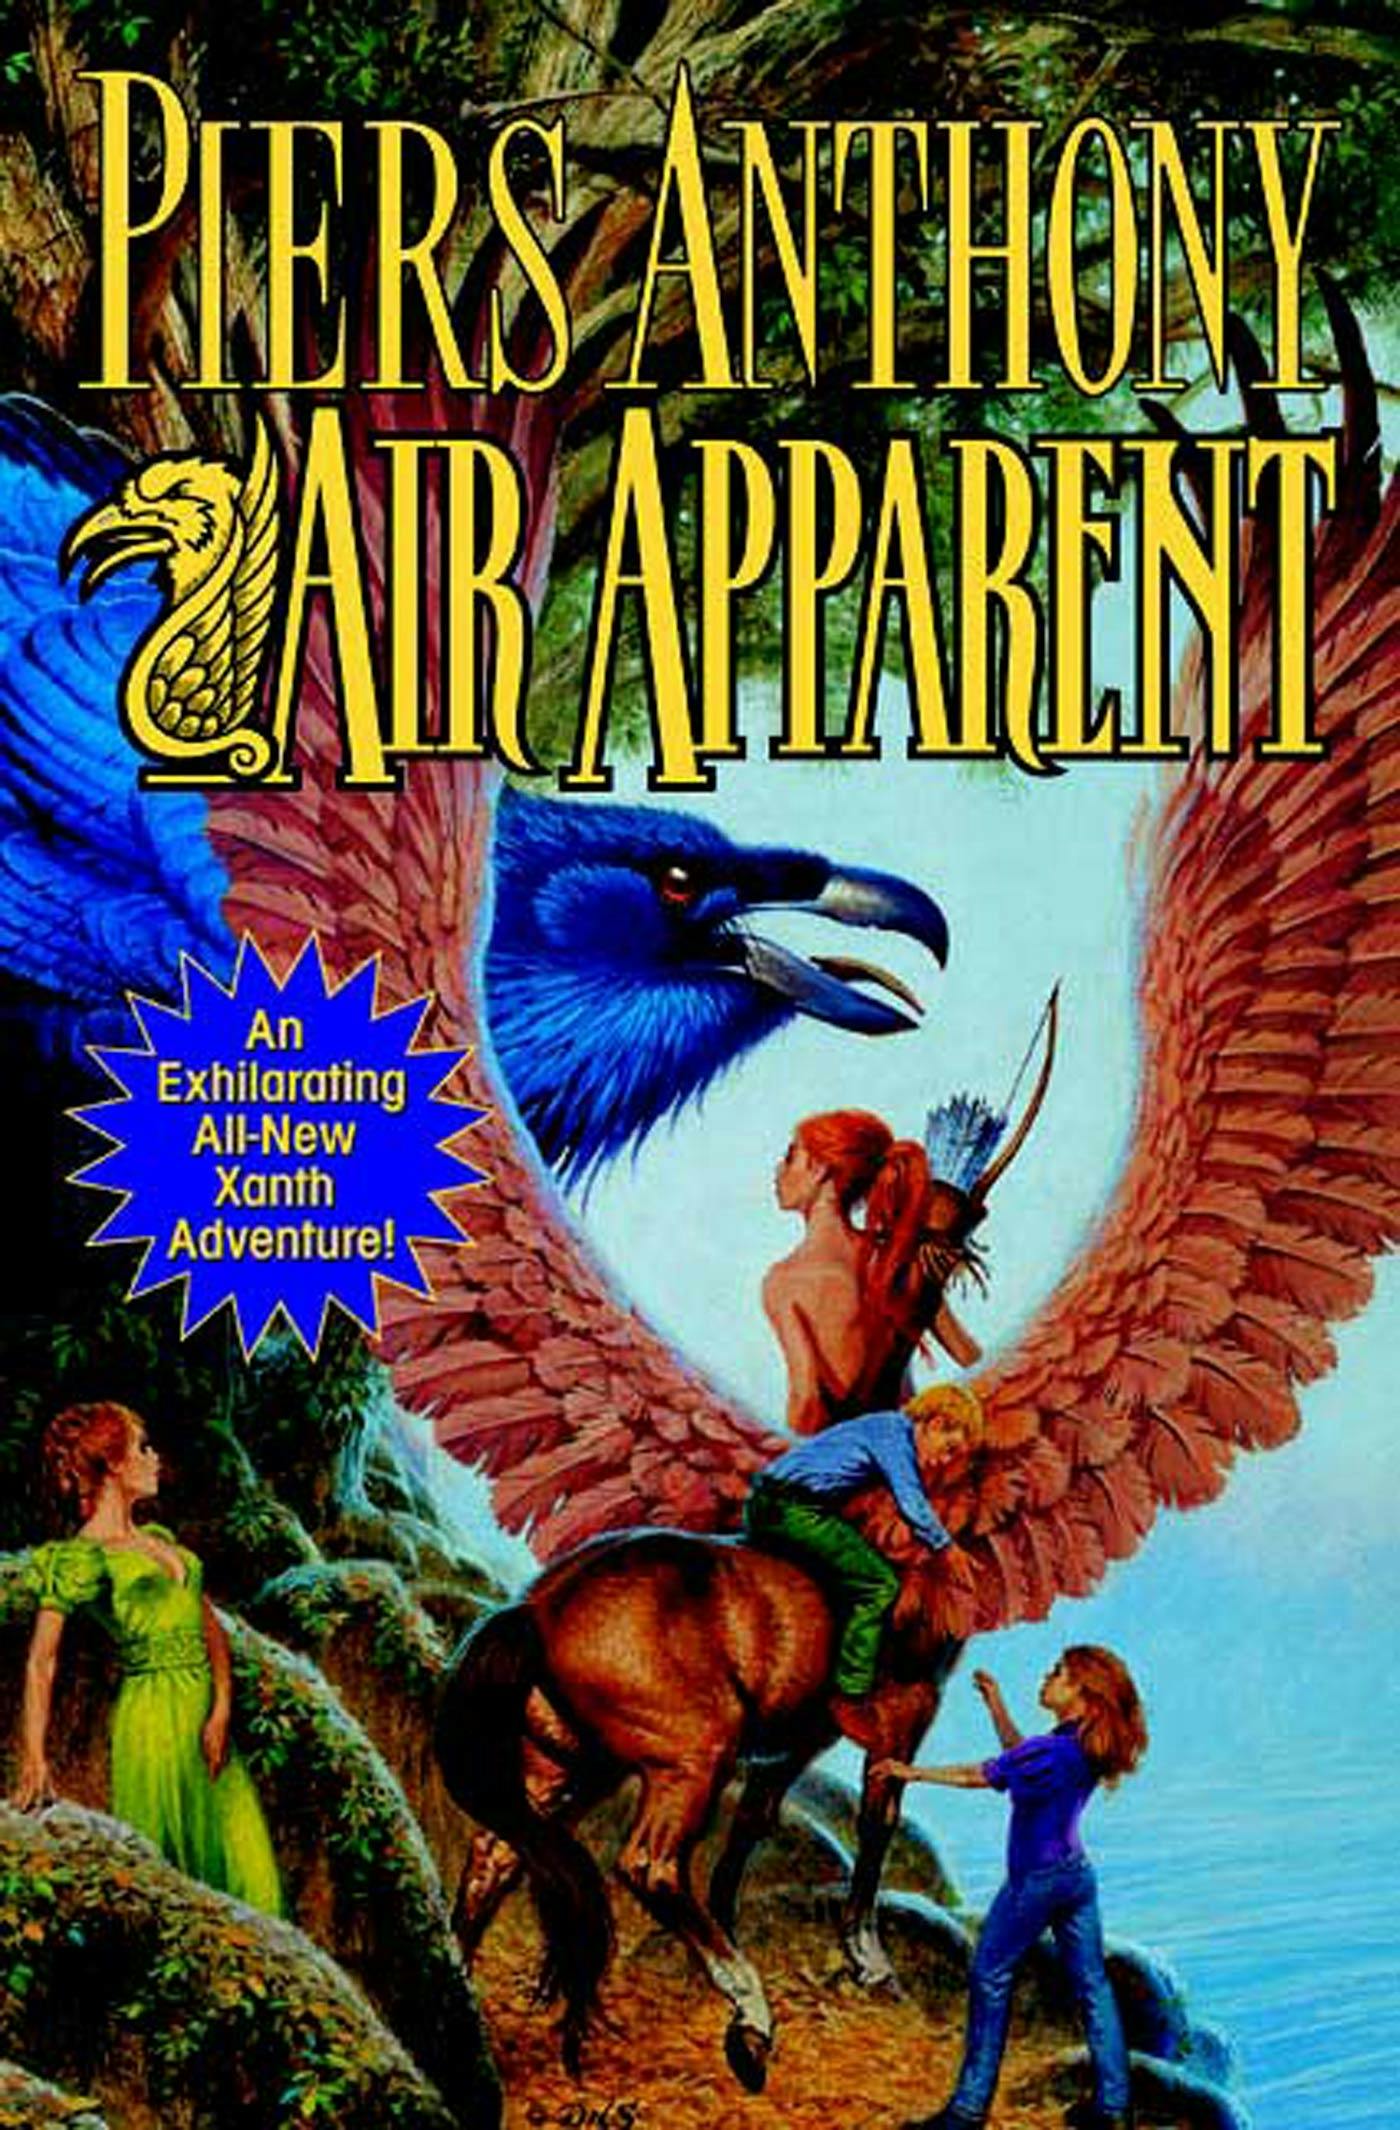 Cover for the book titled as: Air Apparent